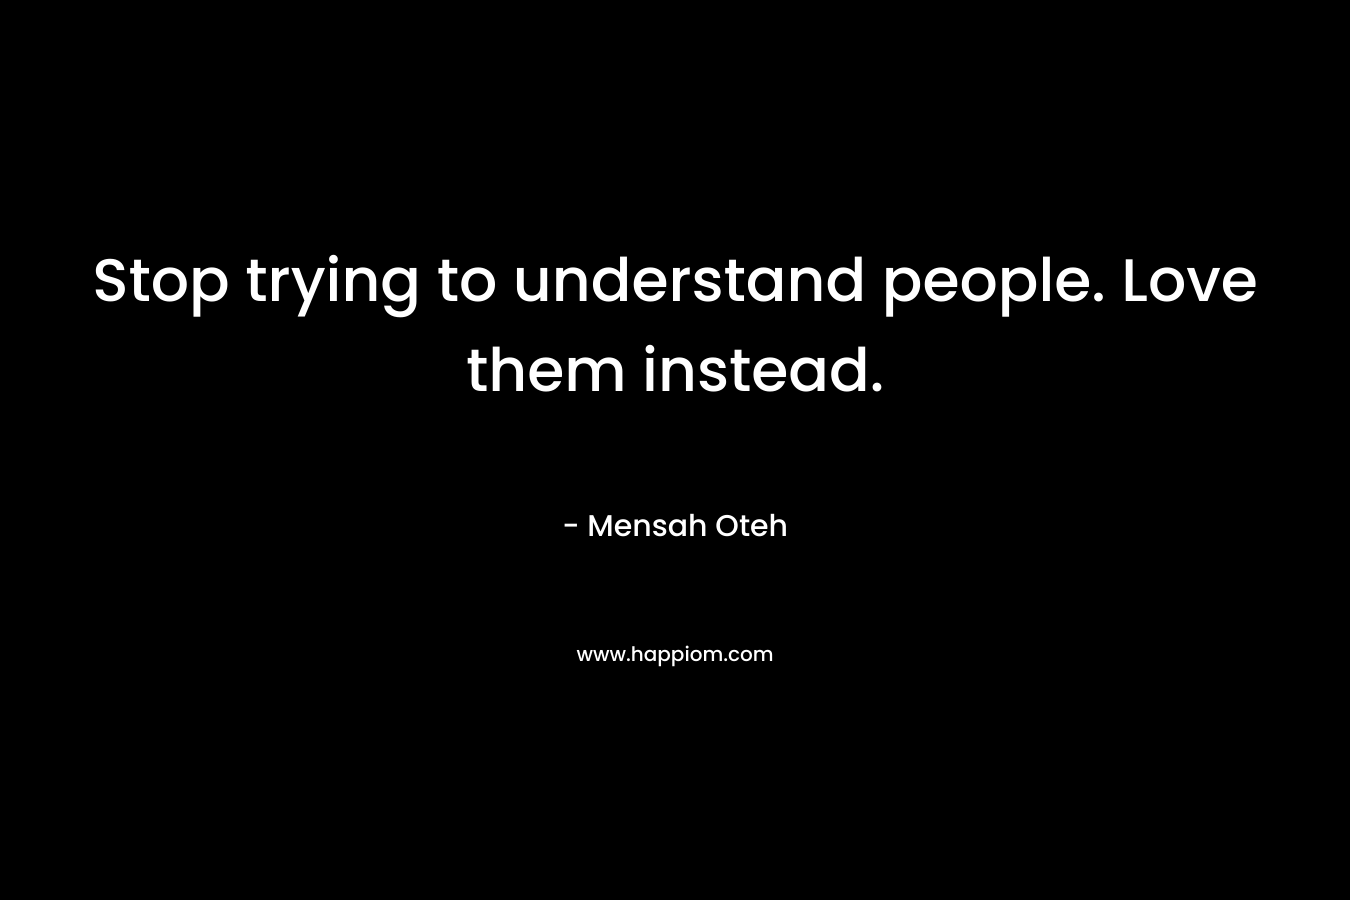 Stop trying to understand people. Love them instead.